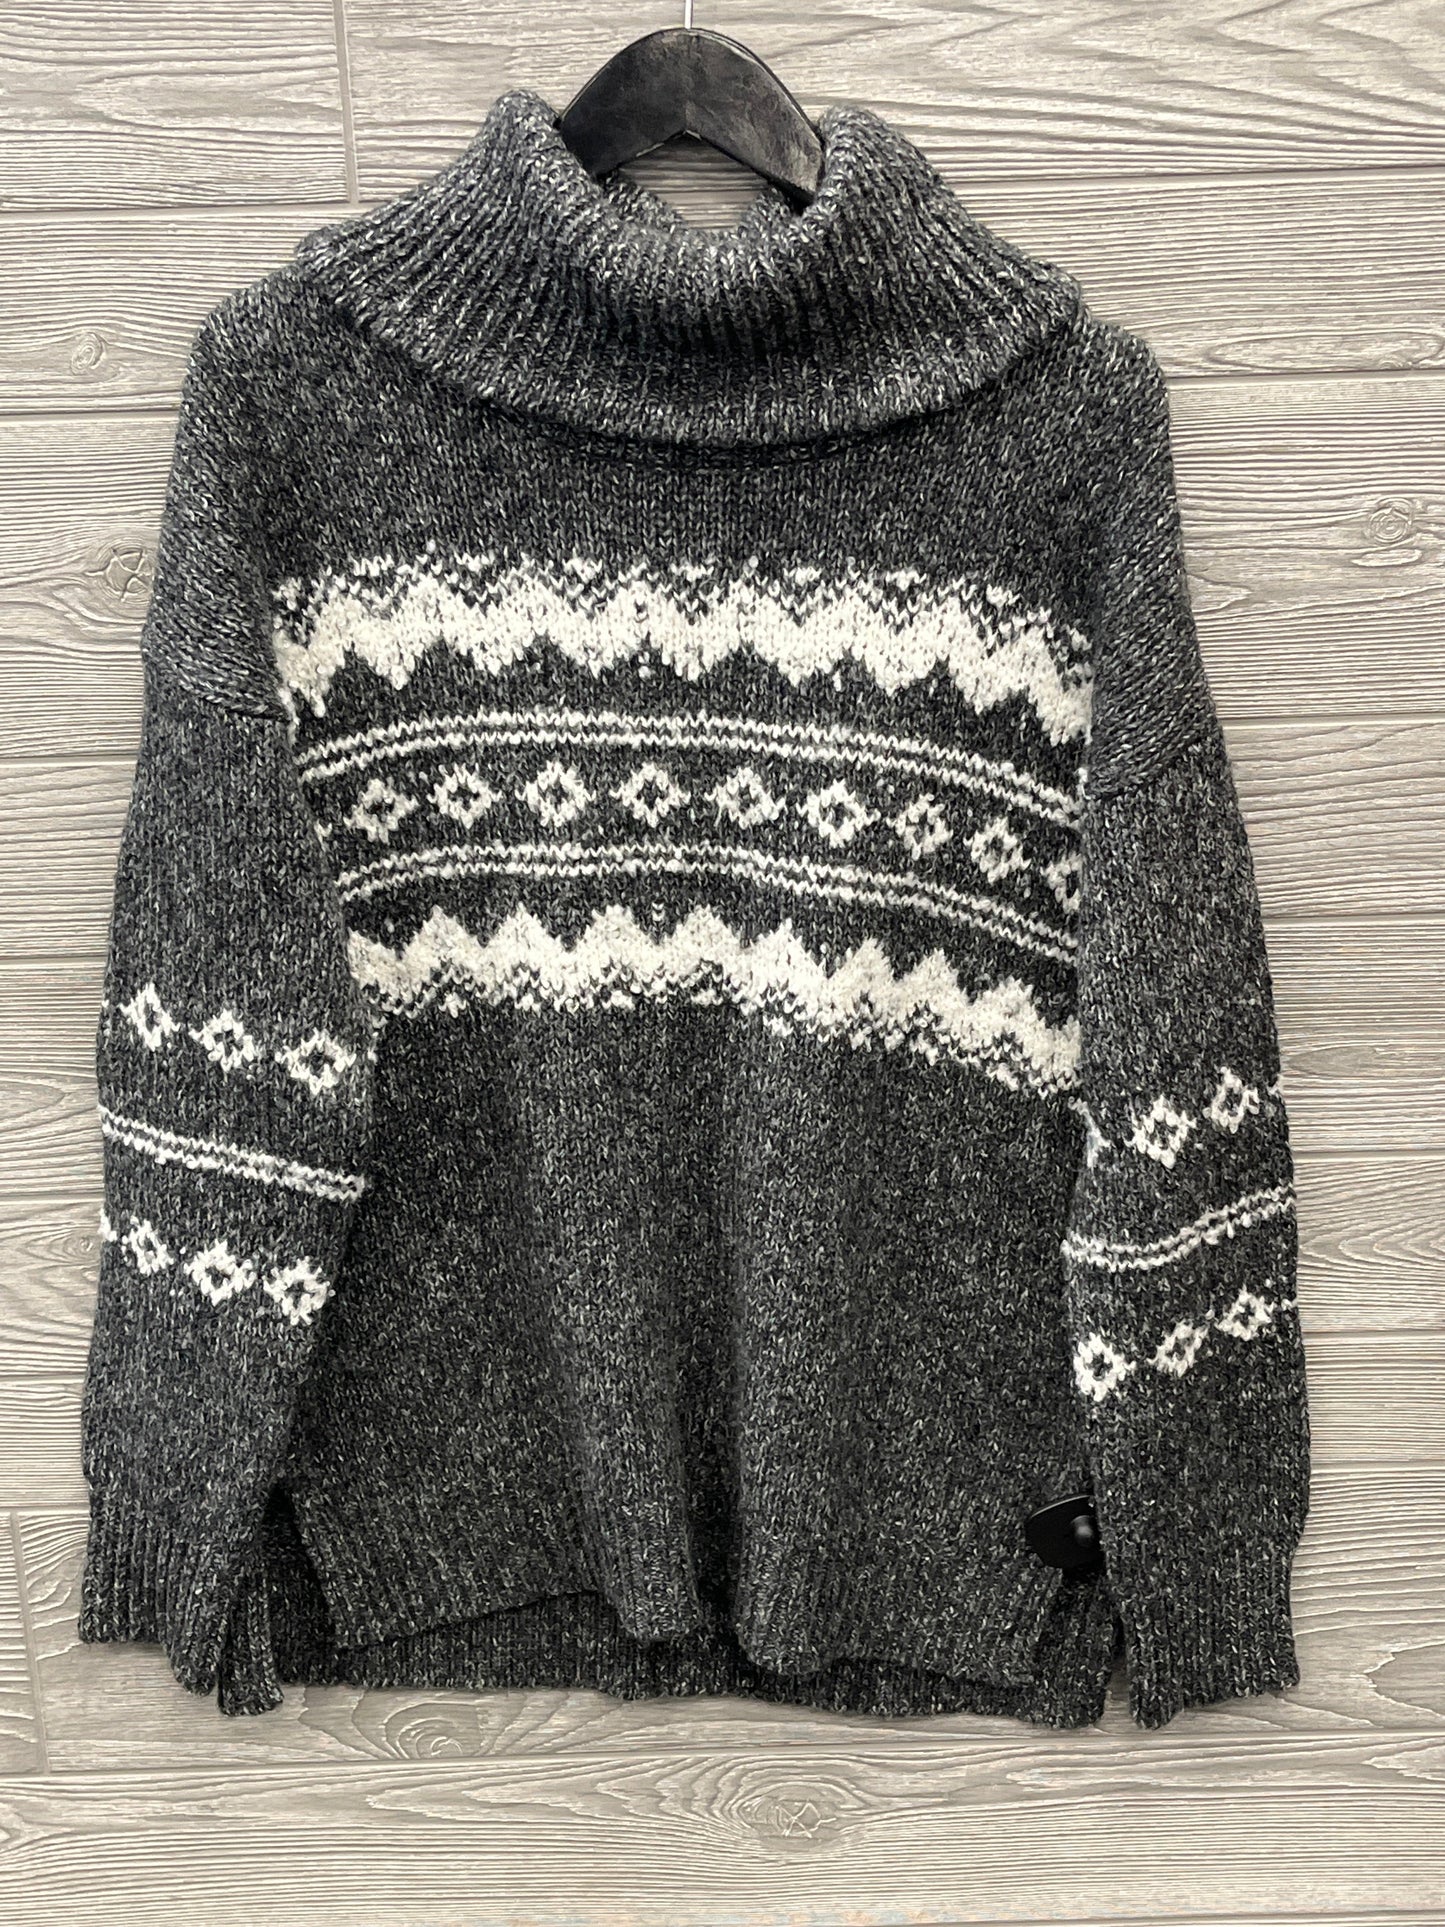 Sweater By Clothes Mentor  Size: L